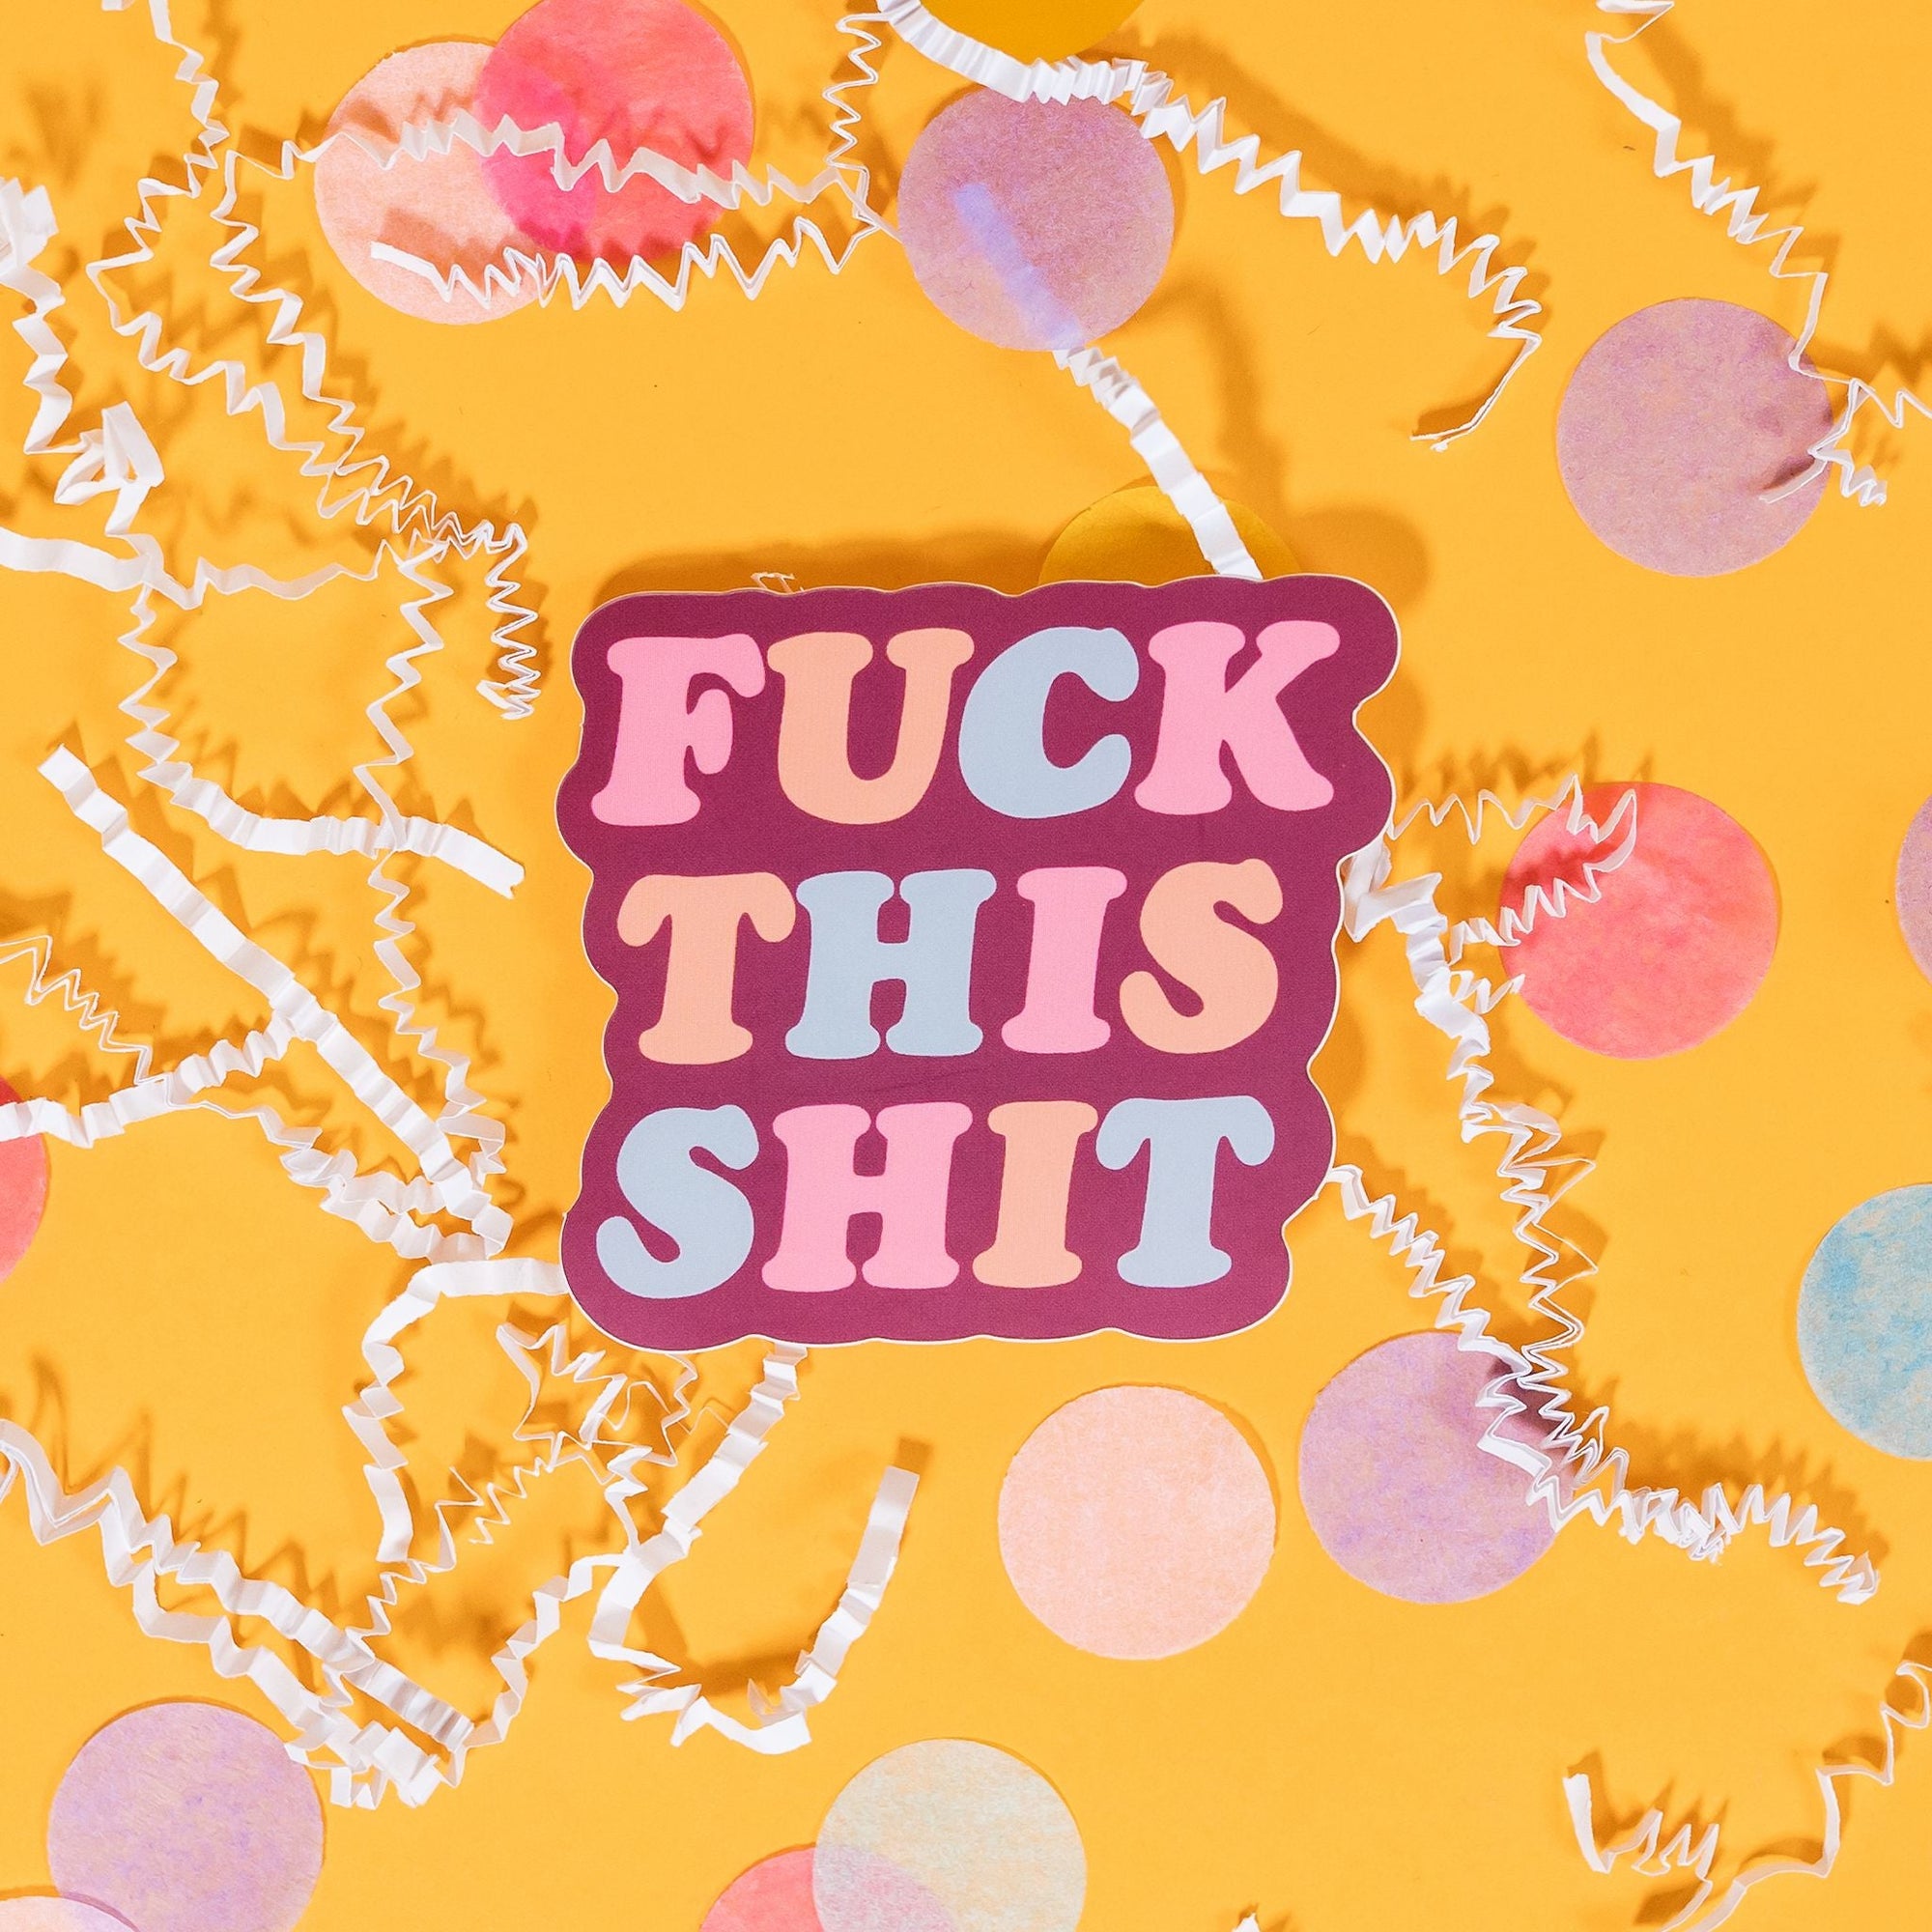 On a sunny mustard background sits a sticker with white crinke and big, colorful confetti scattered around. This raspberry colored sticker says "FUCK THIS SHIT" in a fat, serif font in pink, peach and baby blue.